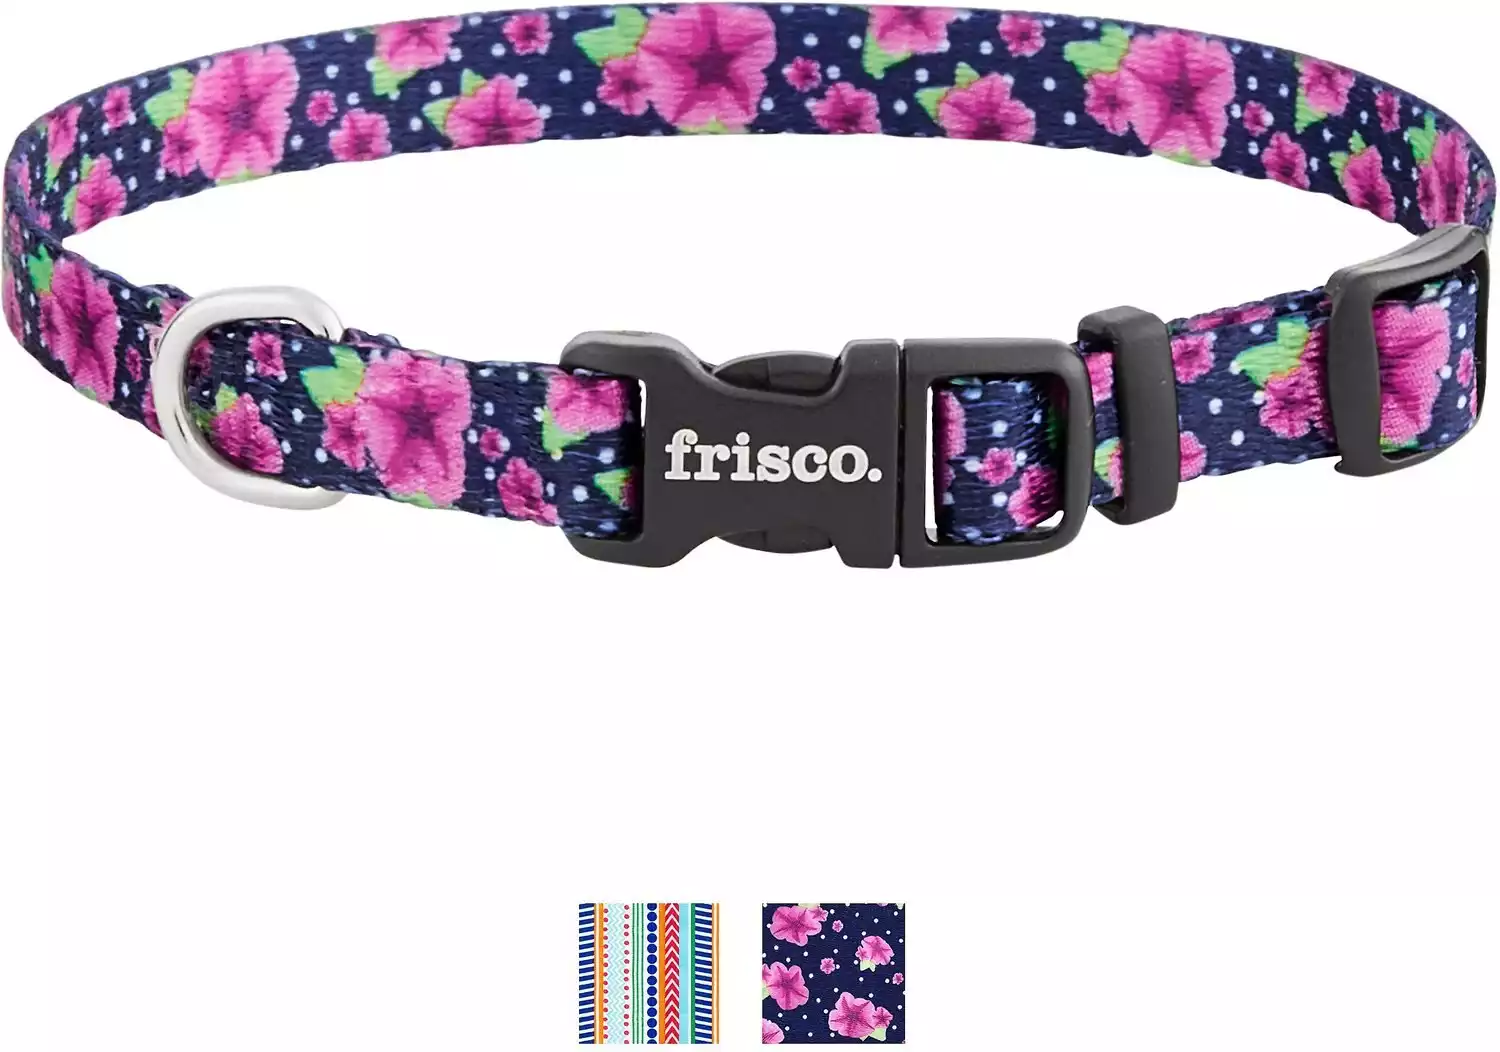 Frisco Patterned Polyester Dog Collar